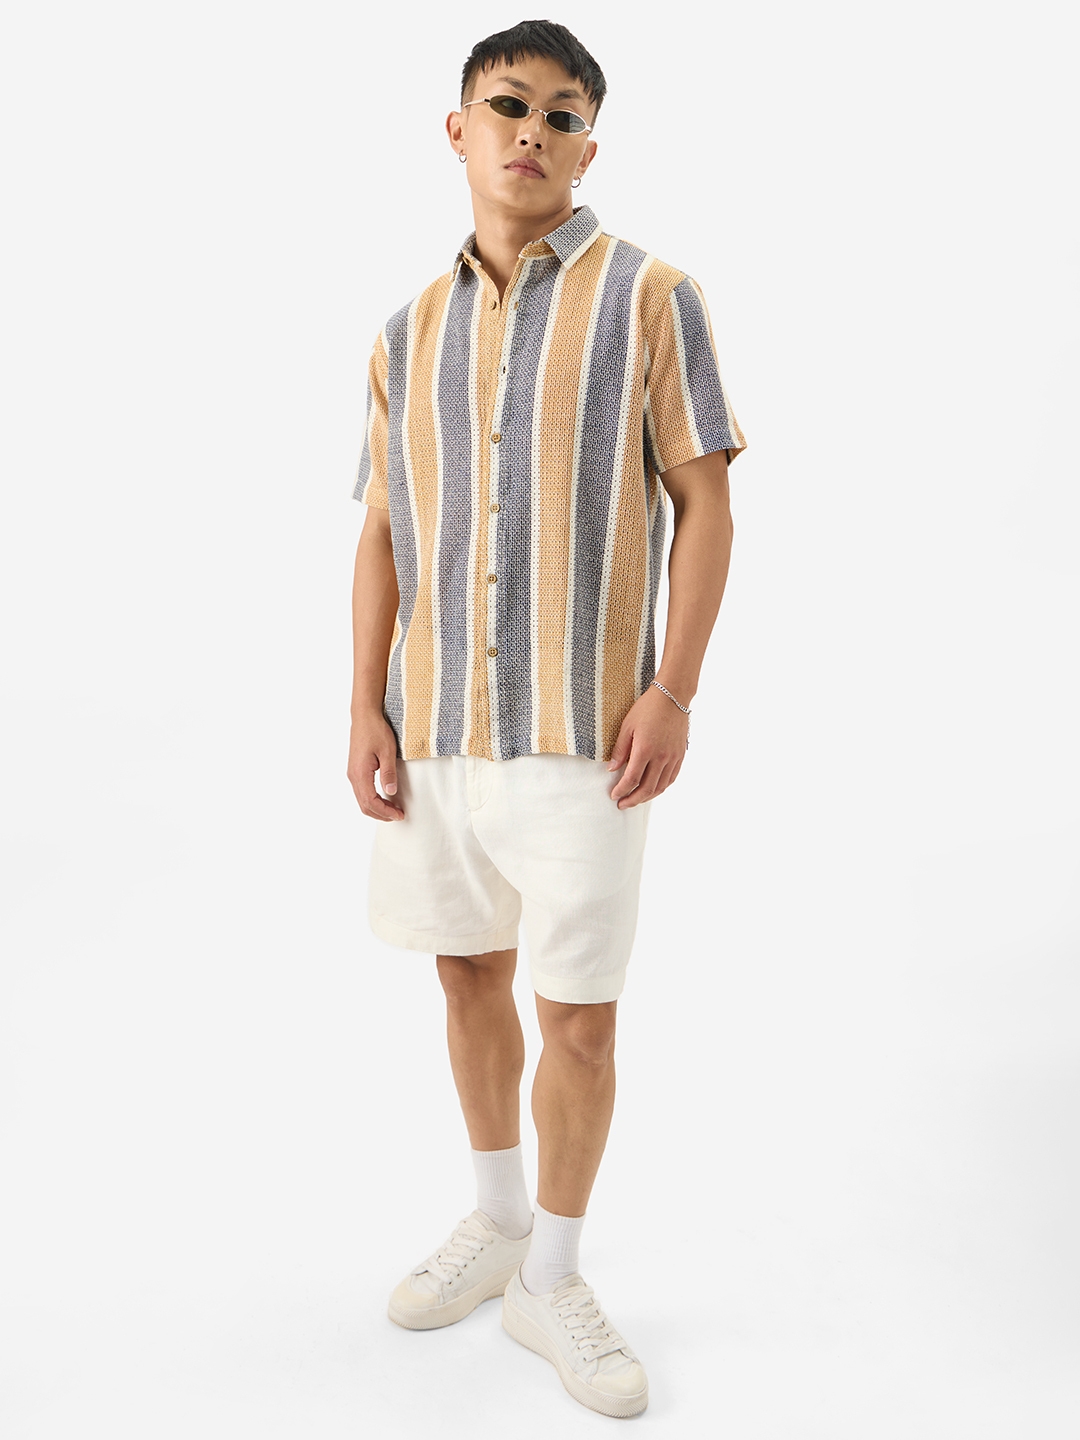 The Souled Store | Men's Stripes Black, Brown Half Sleeve Casual Shirt